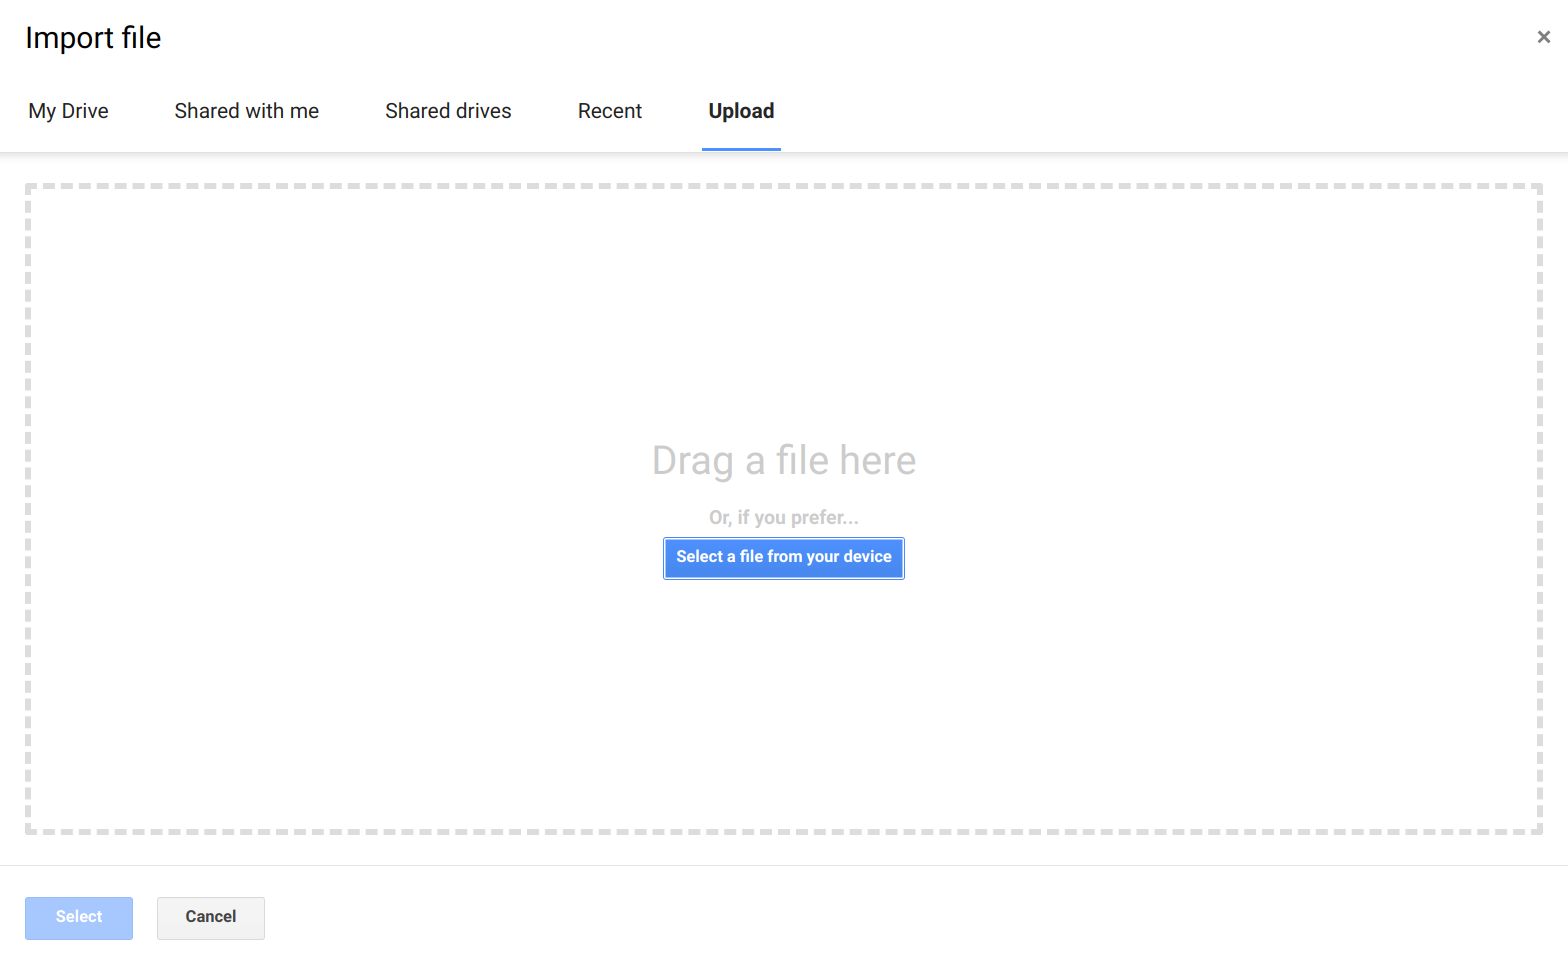 File import screen in Google Sheets